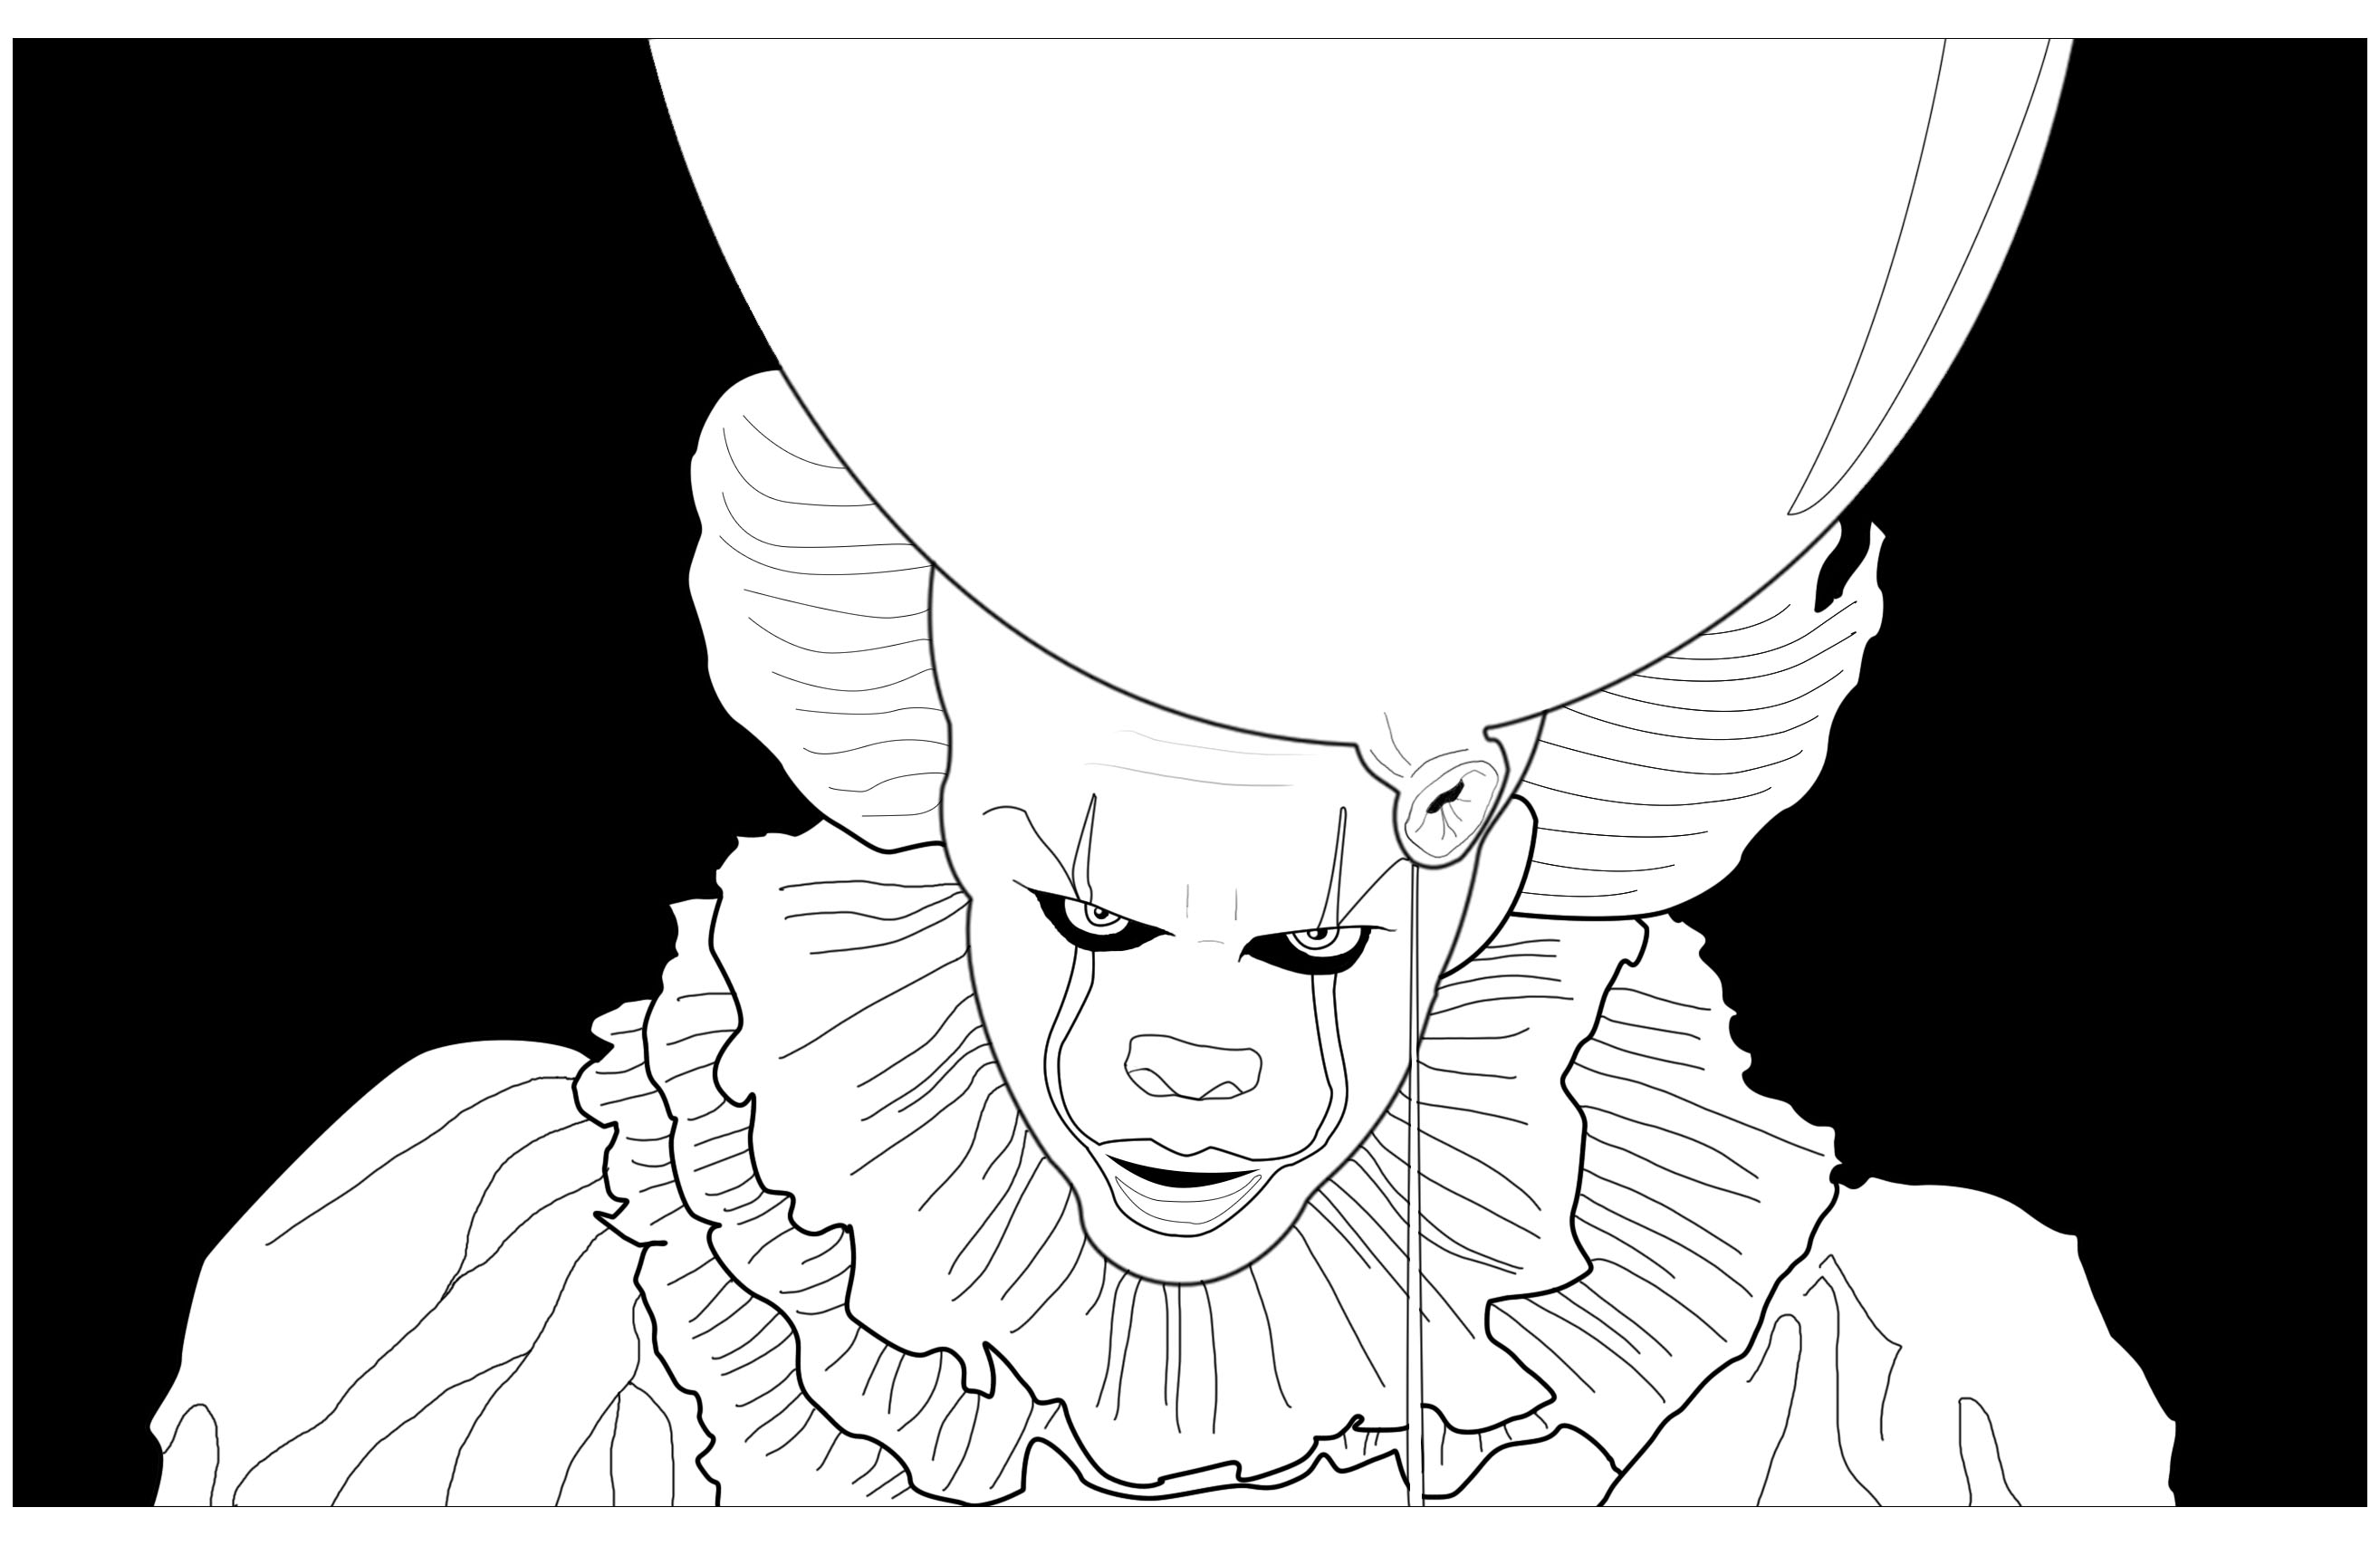 Ca clown pennywise black background